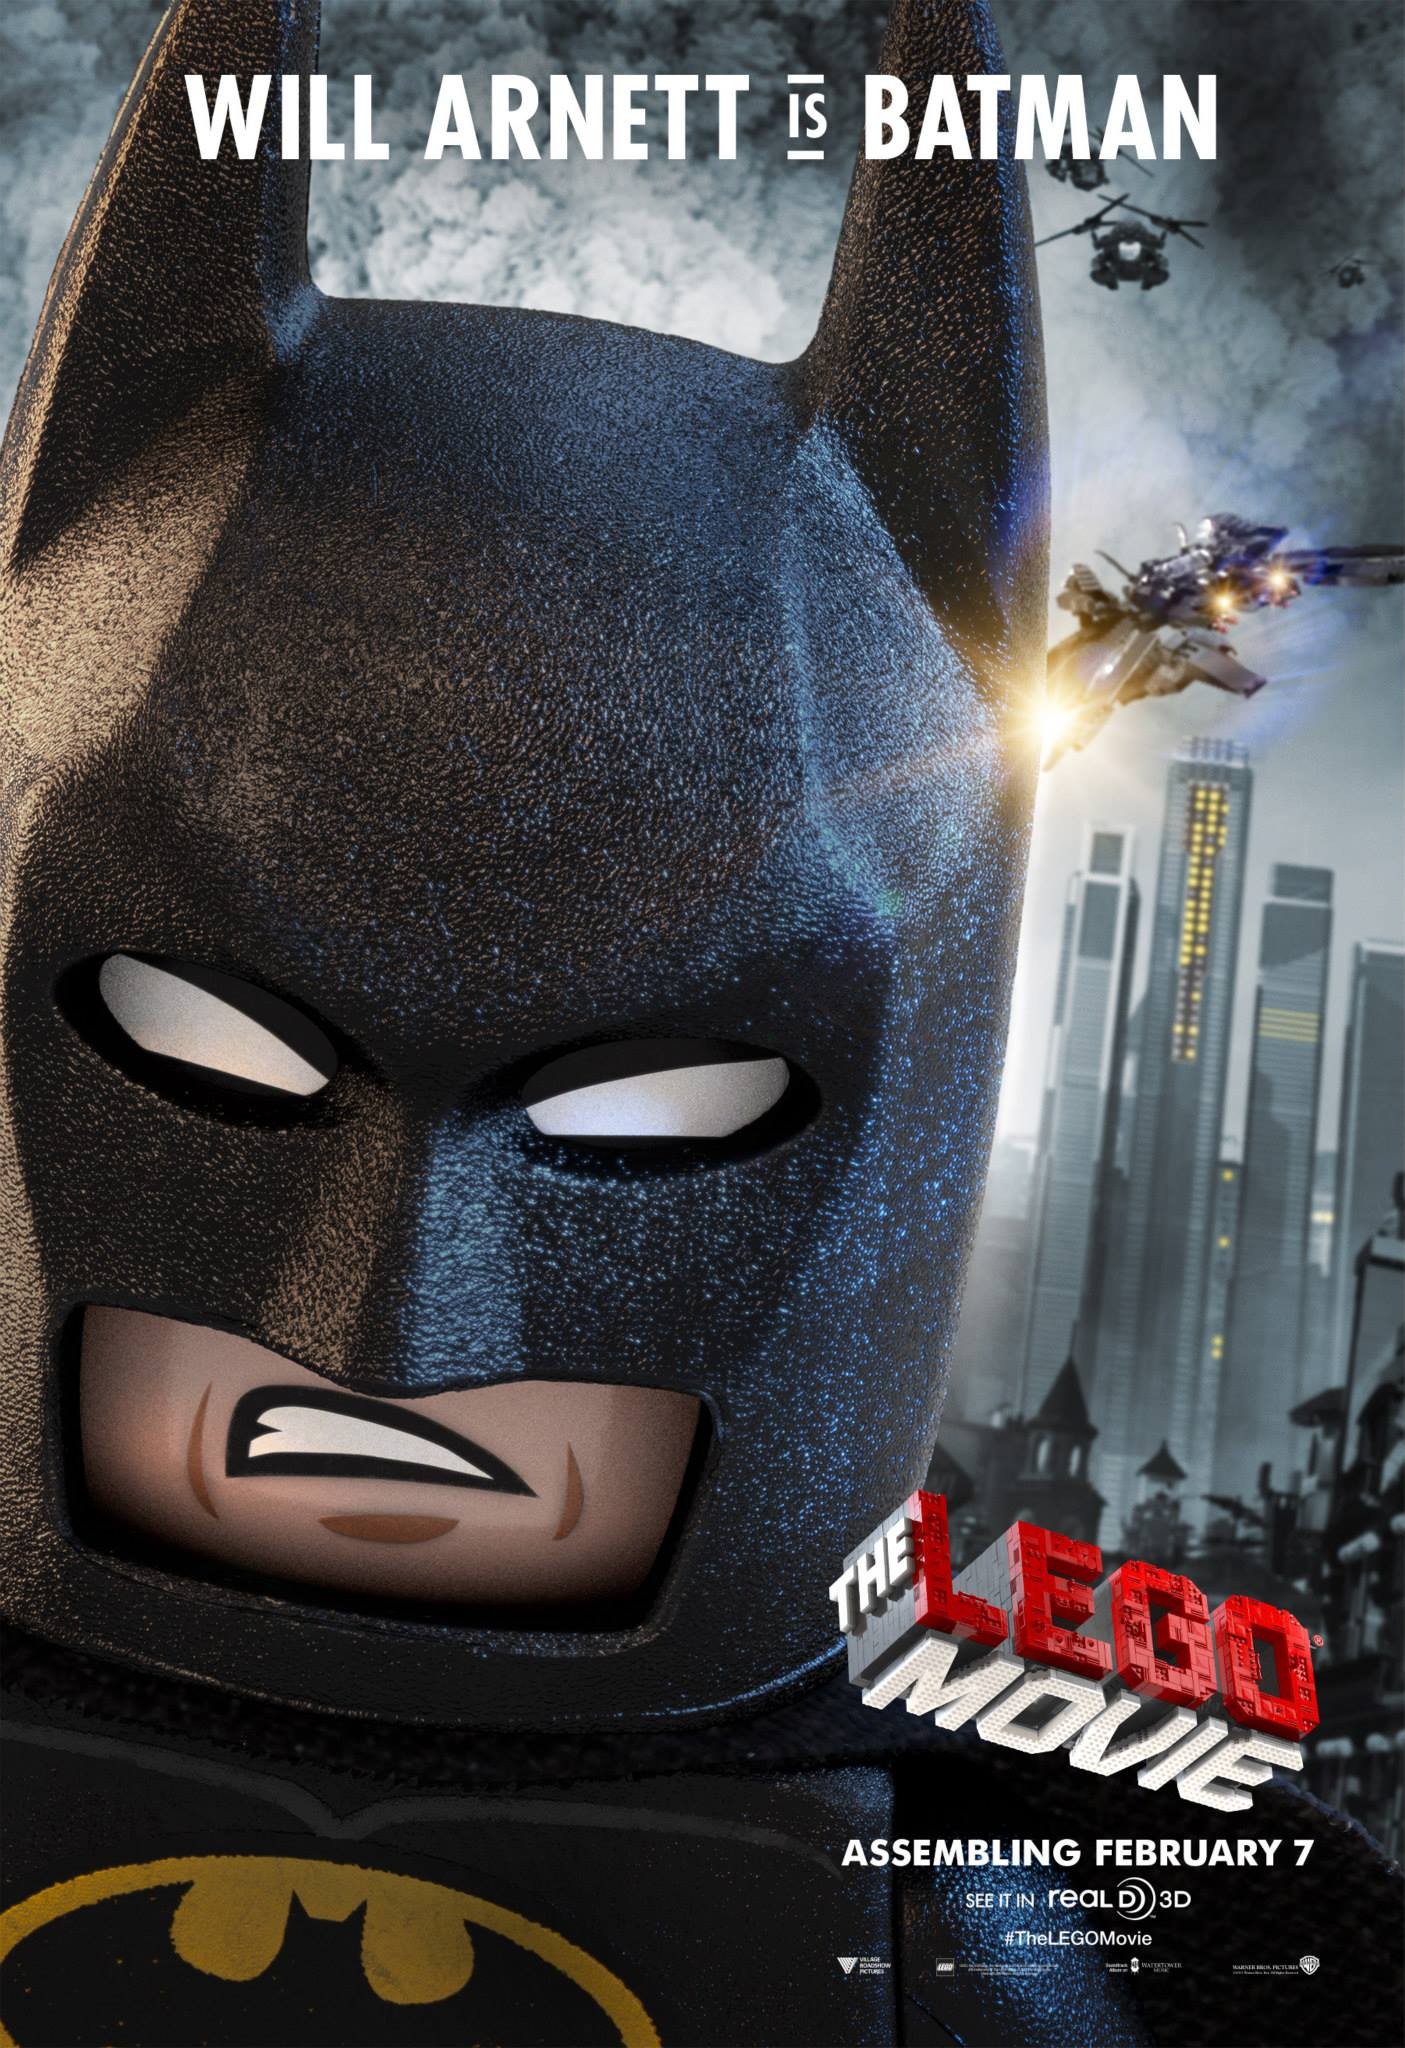 The Lego Movie Character Poster - Batman